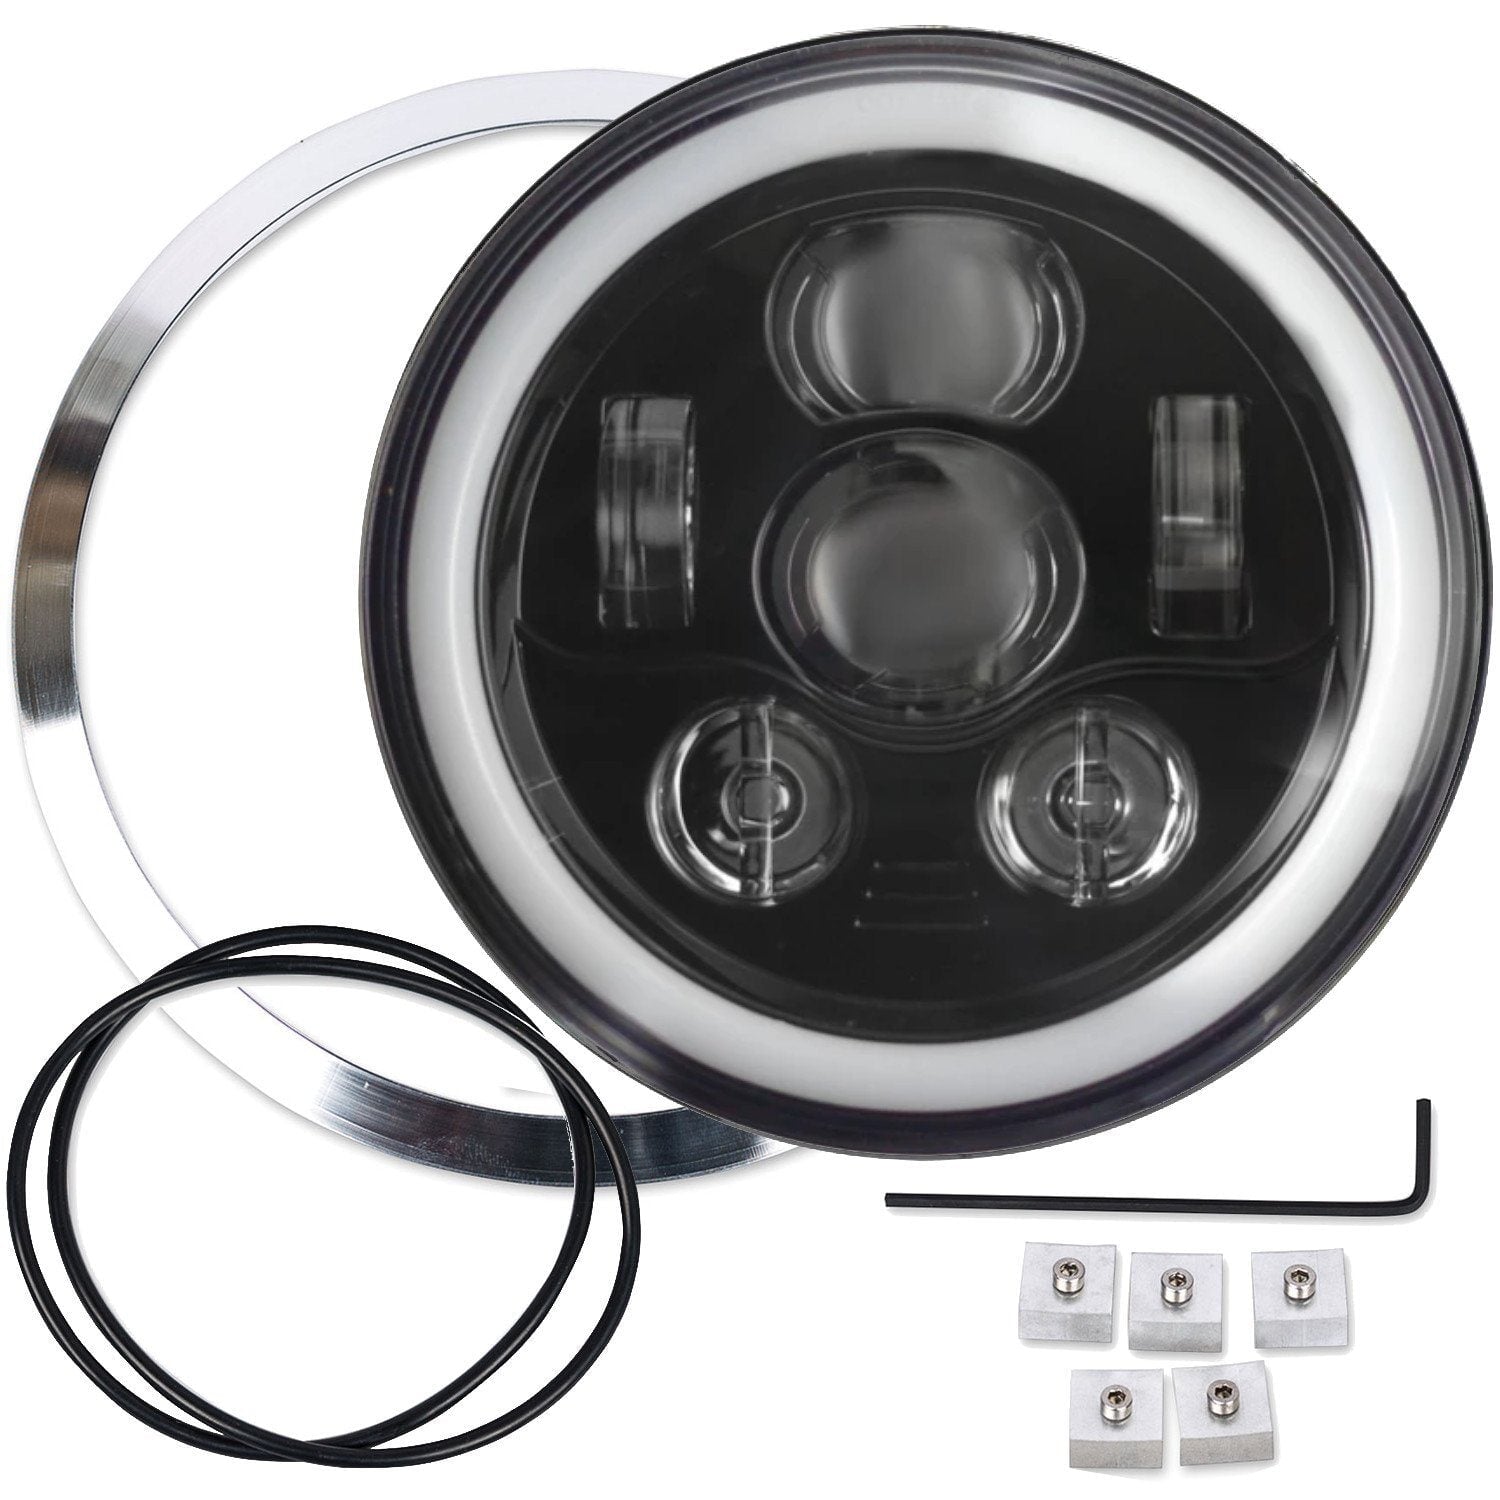 Eagle Lights 7" LED Headlight Kit for Triumph T100 and T120 Models